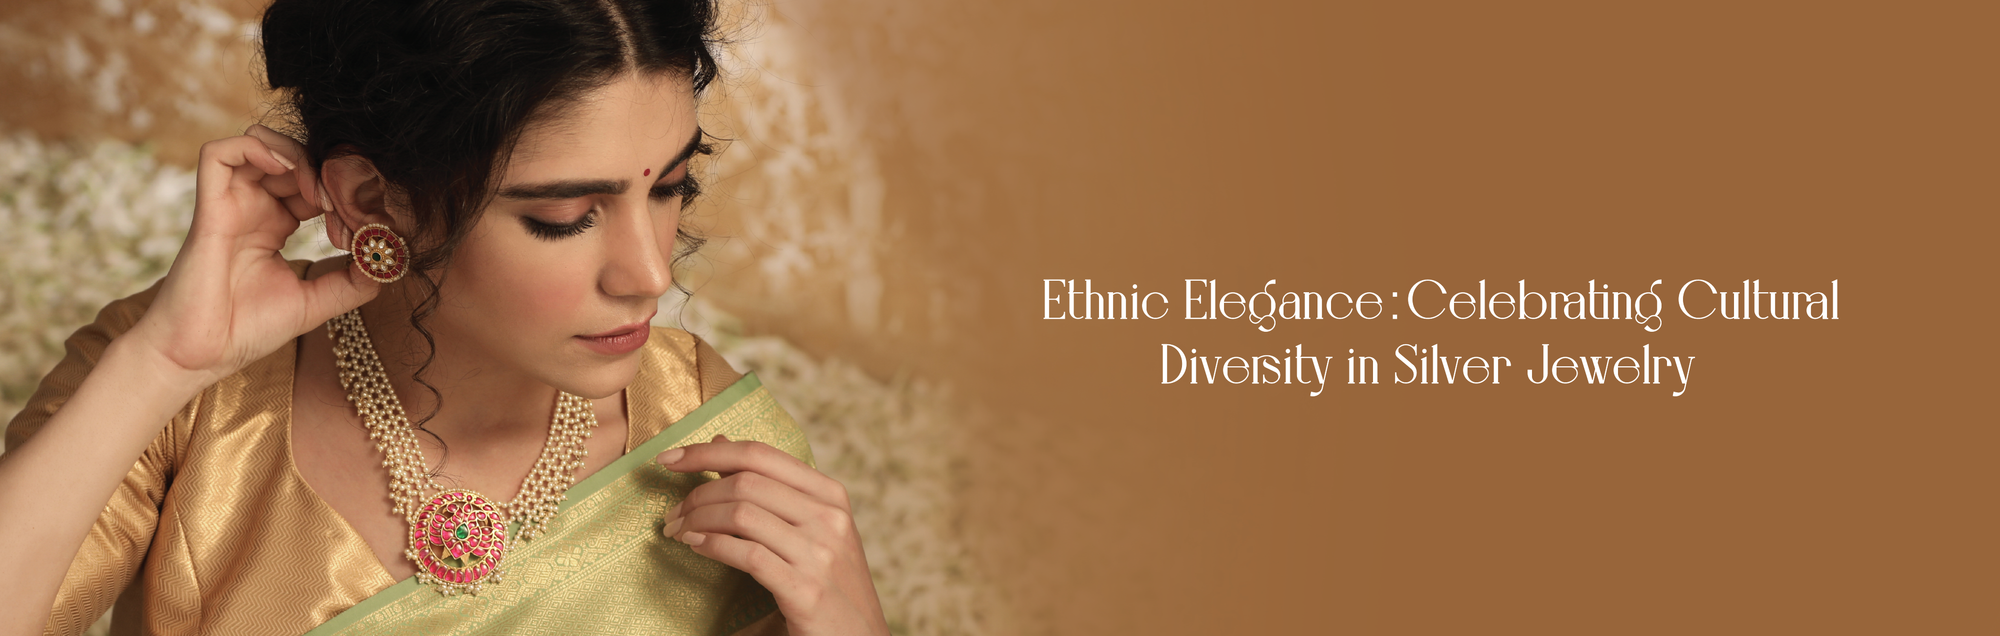 Ethnic Elegance: Celebrating Cultural Diversity in Silver Jewelry